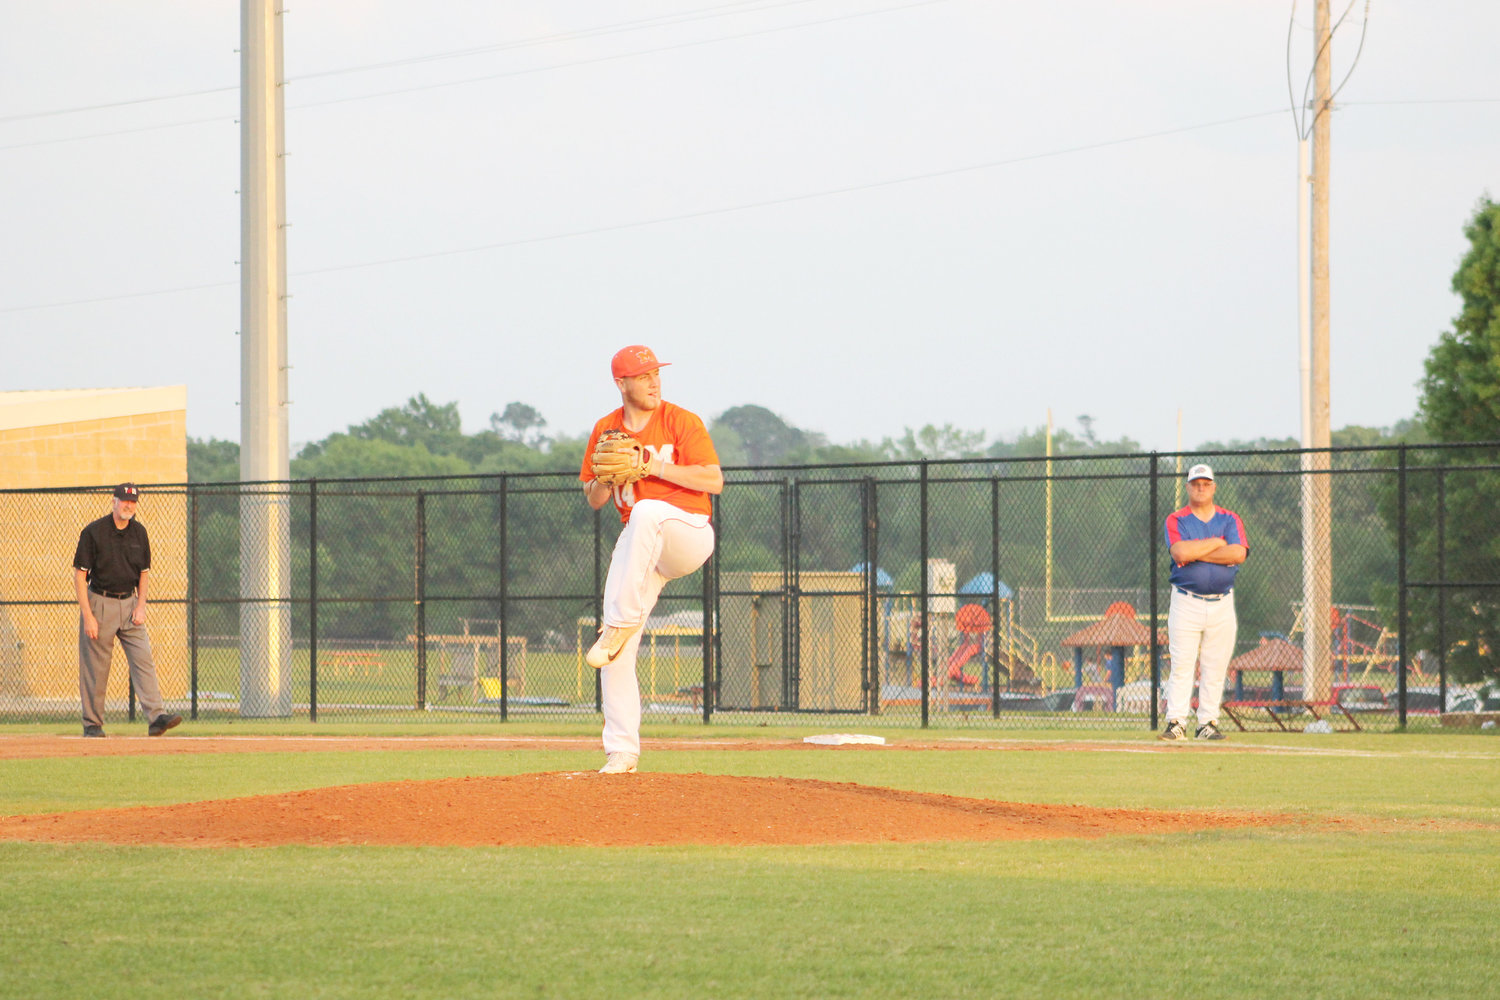 Hard throwing Noah Sneed struck out 14 Quitman Bulldogs in last Tuesday’s Jacket 6-3 district win.